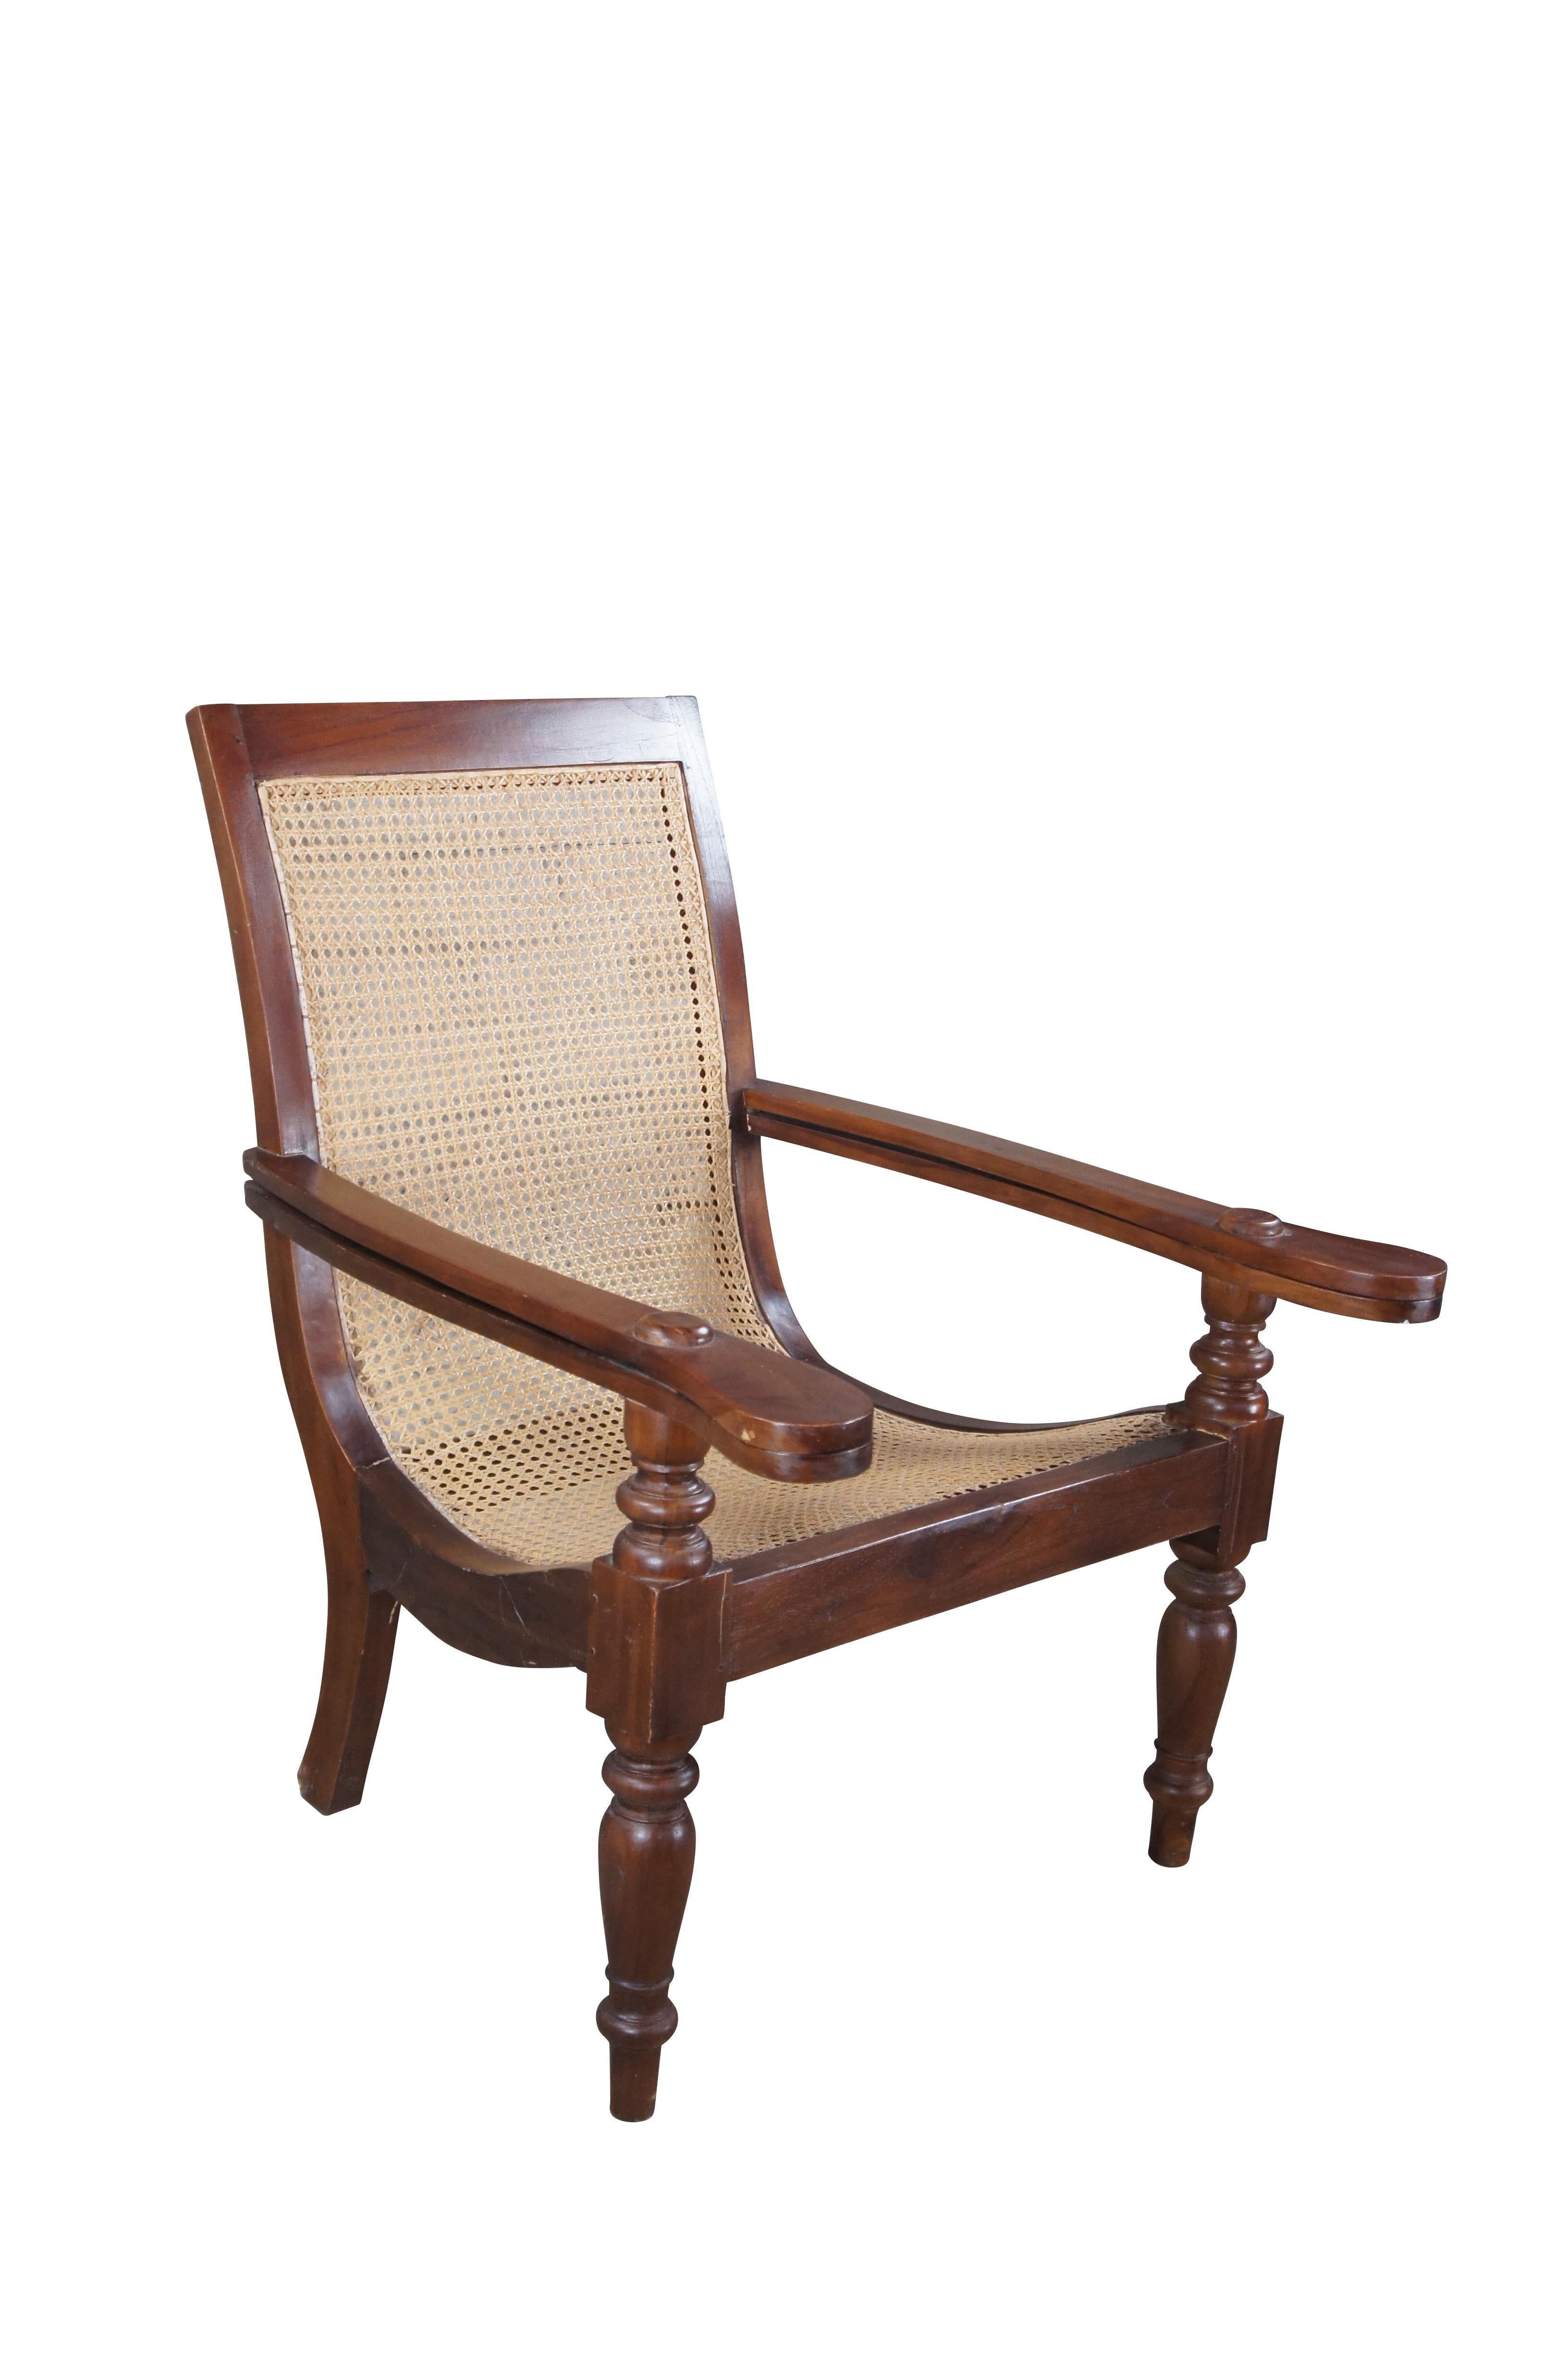 Anglo-Indian Antique British Colonial Anglo Indian Teak Extendable Arm Caned Plantation Chair